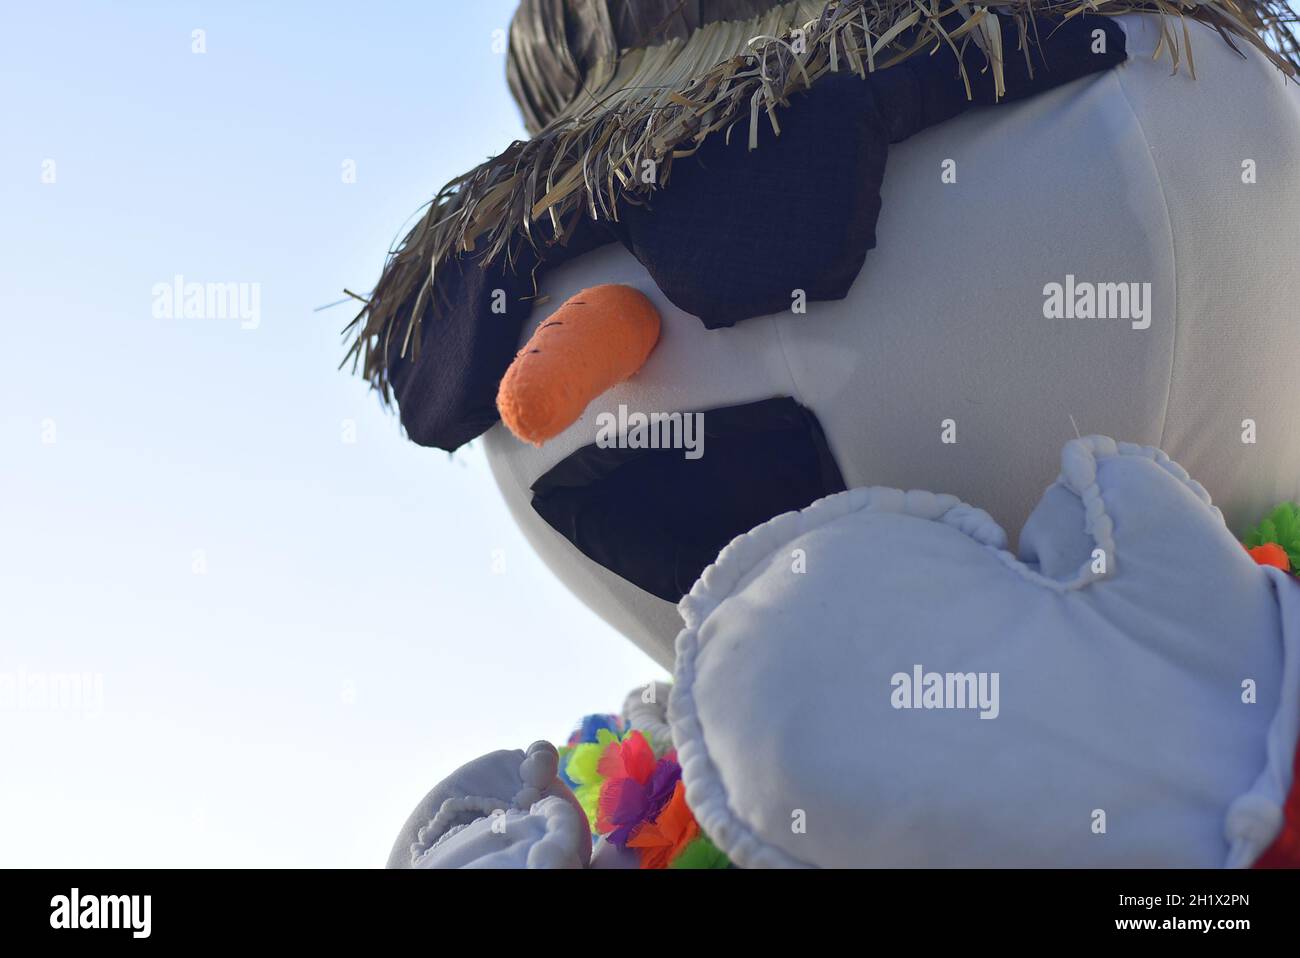 Snowman mascot close up detail with blurred background Stock Photo